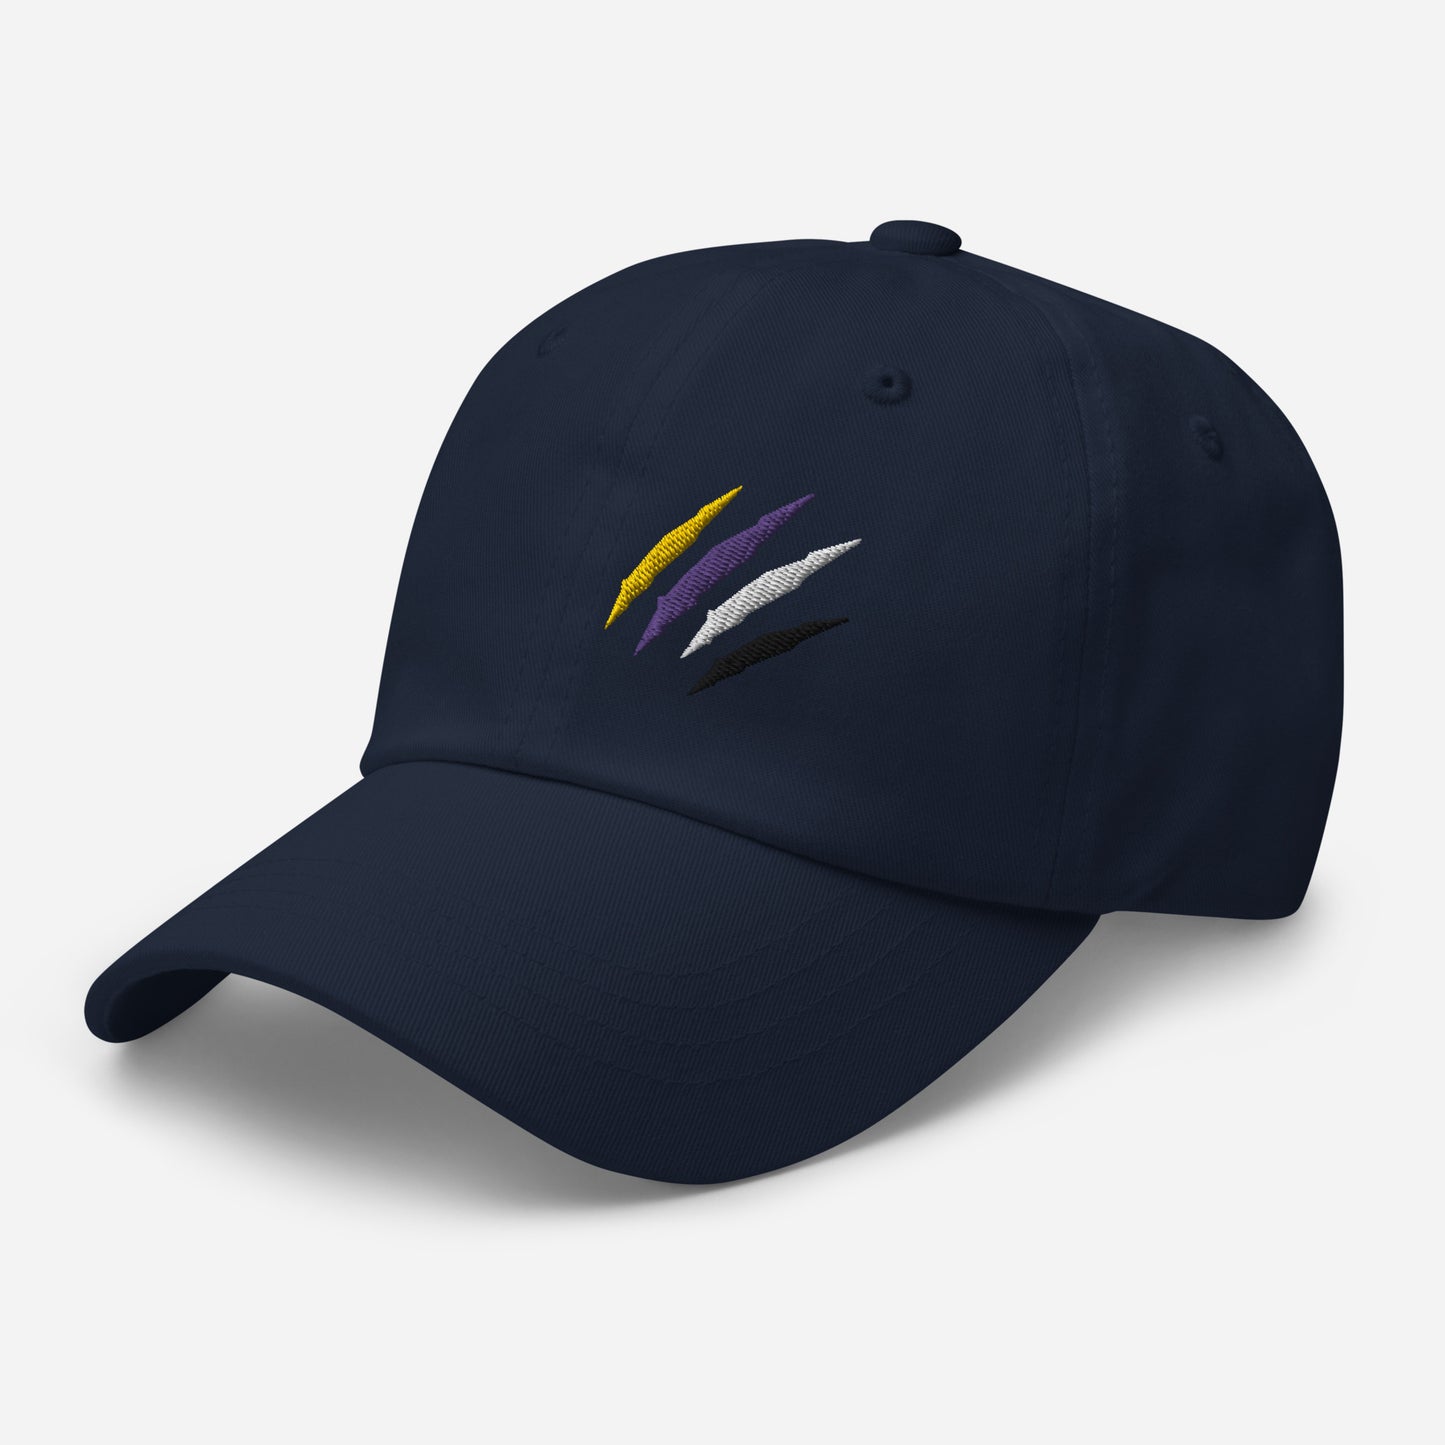 Navy baseball hat featuring non-binary pride scratch mark embroidery with a low profile, adjustable strap.